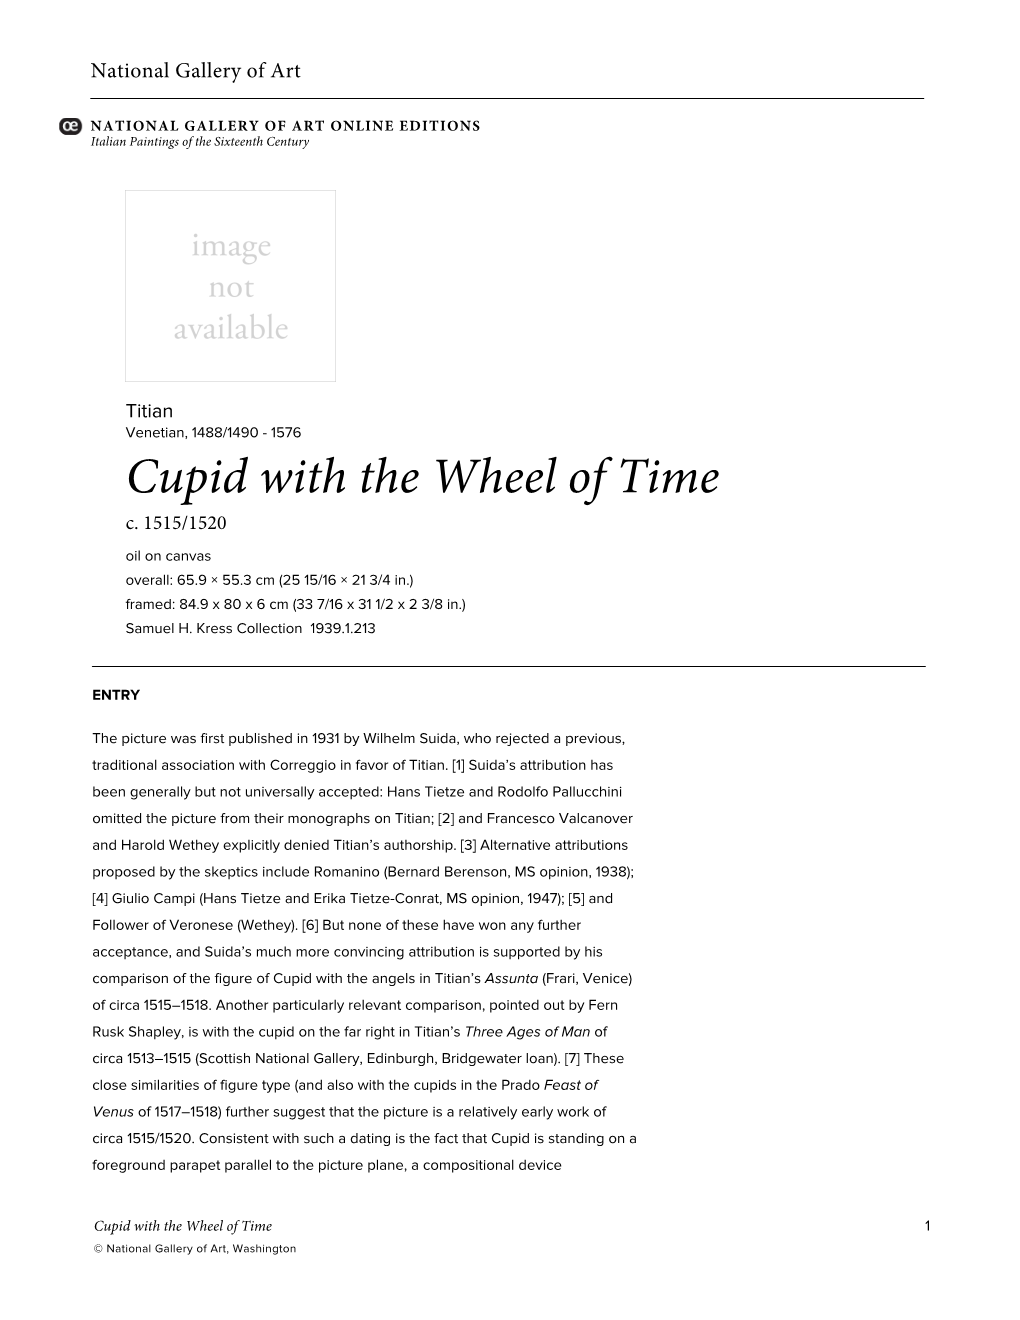 Cupid with the Wheel of Time C